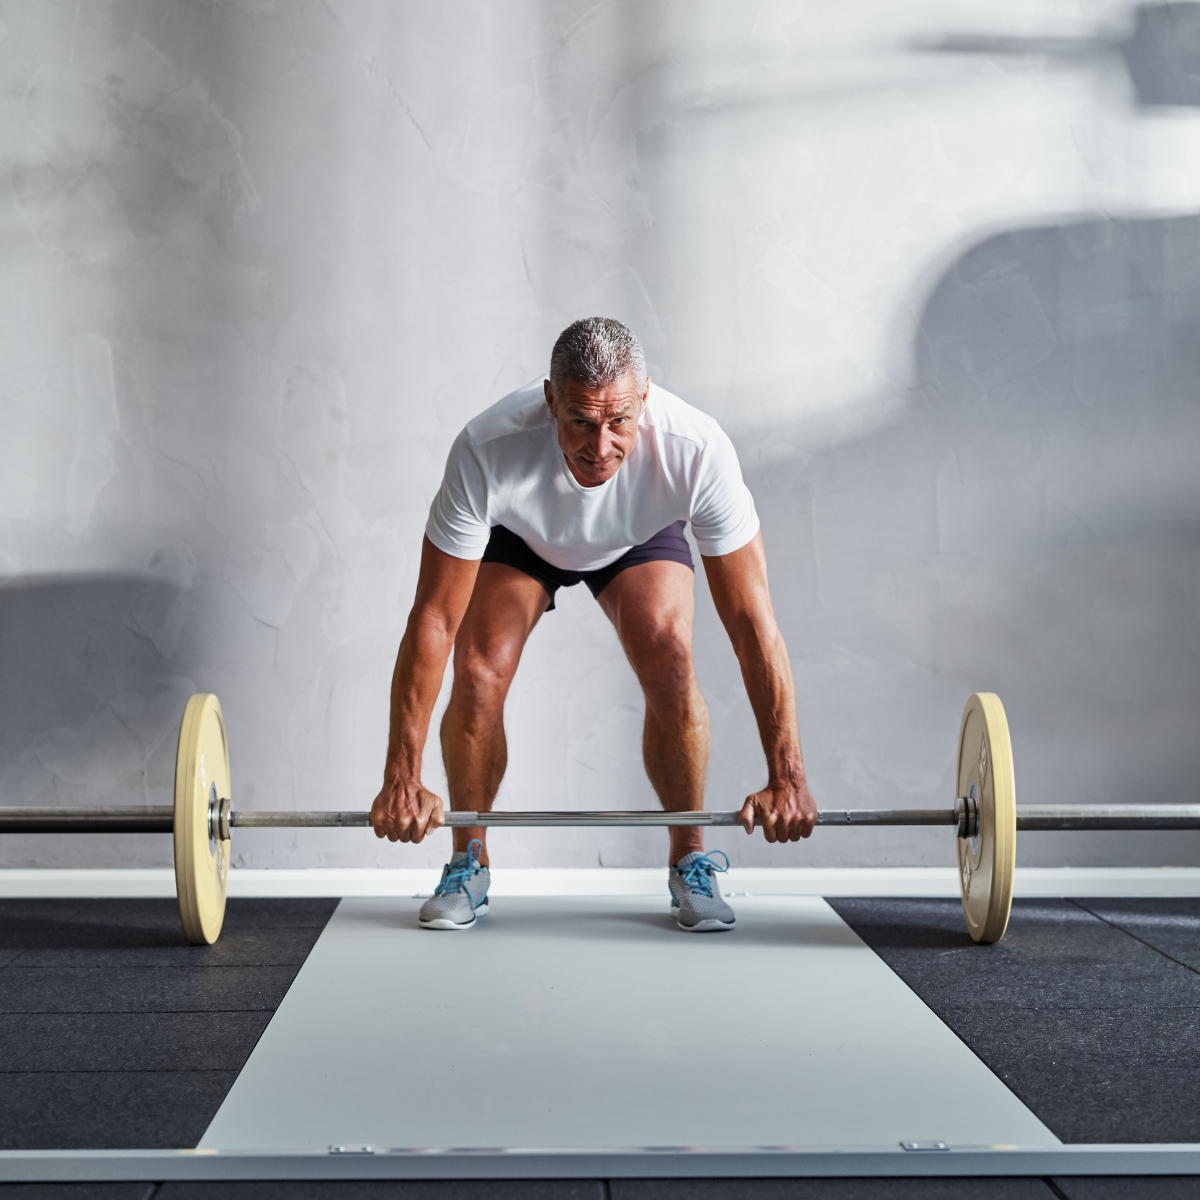 increase bone density and reduce risk of osteoporosis through strength and resistance training